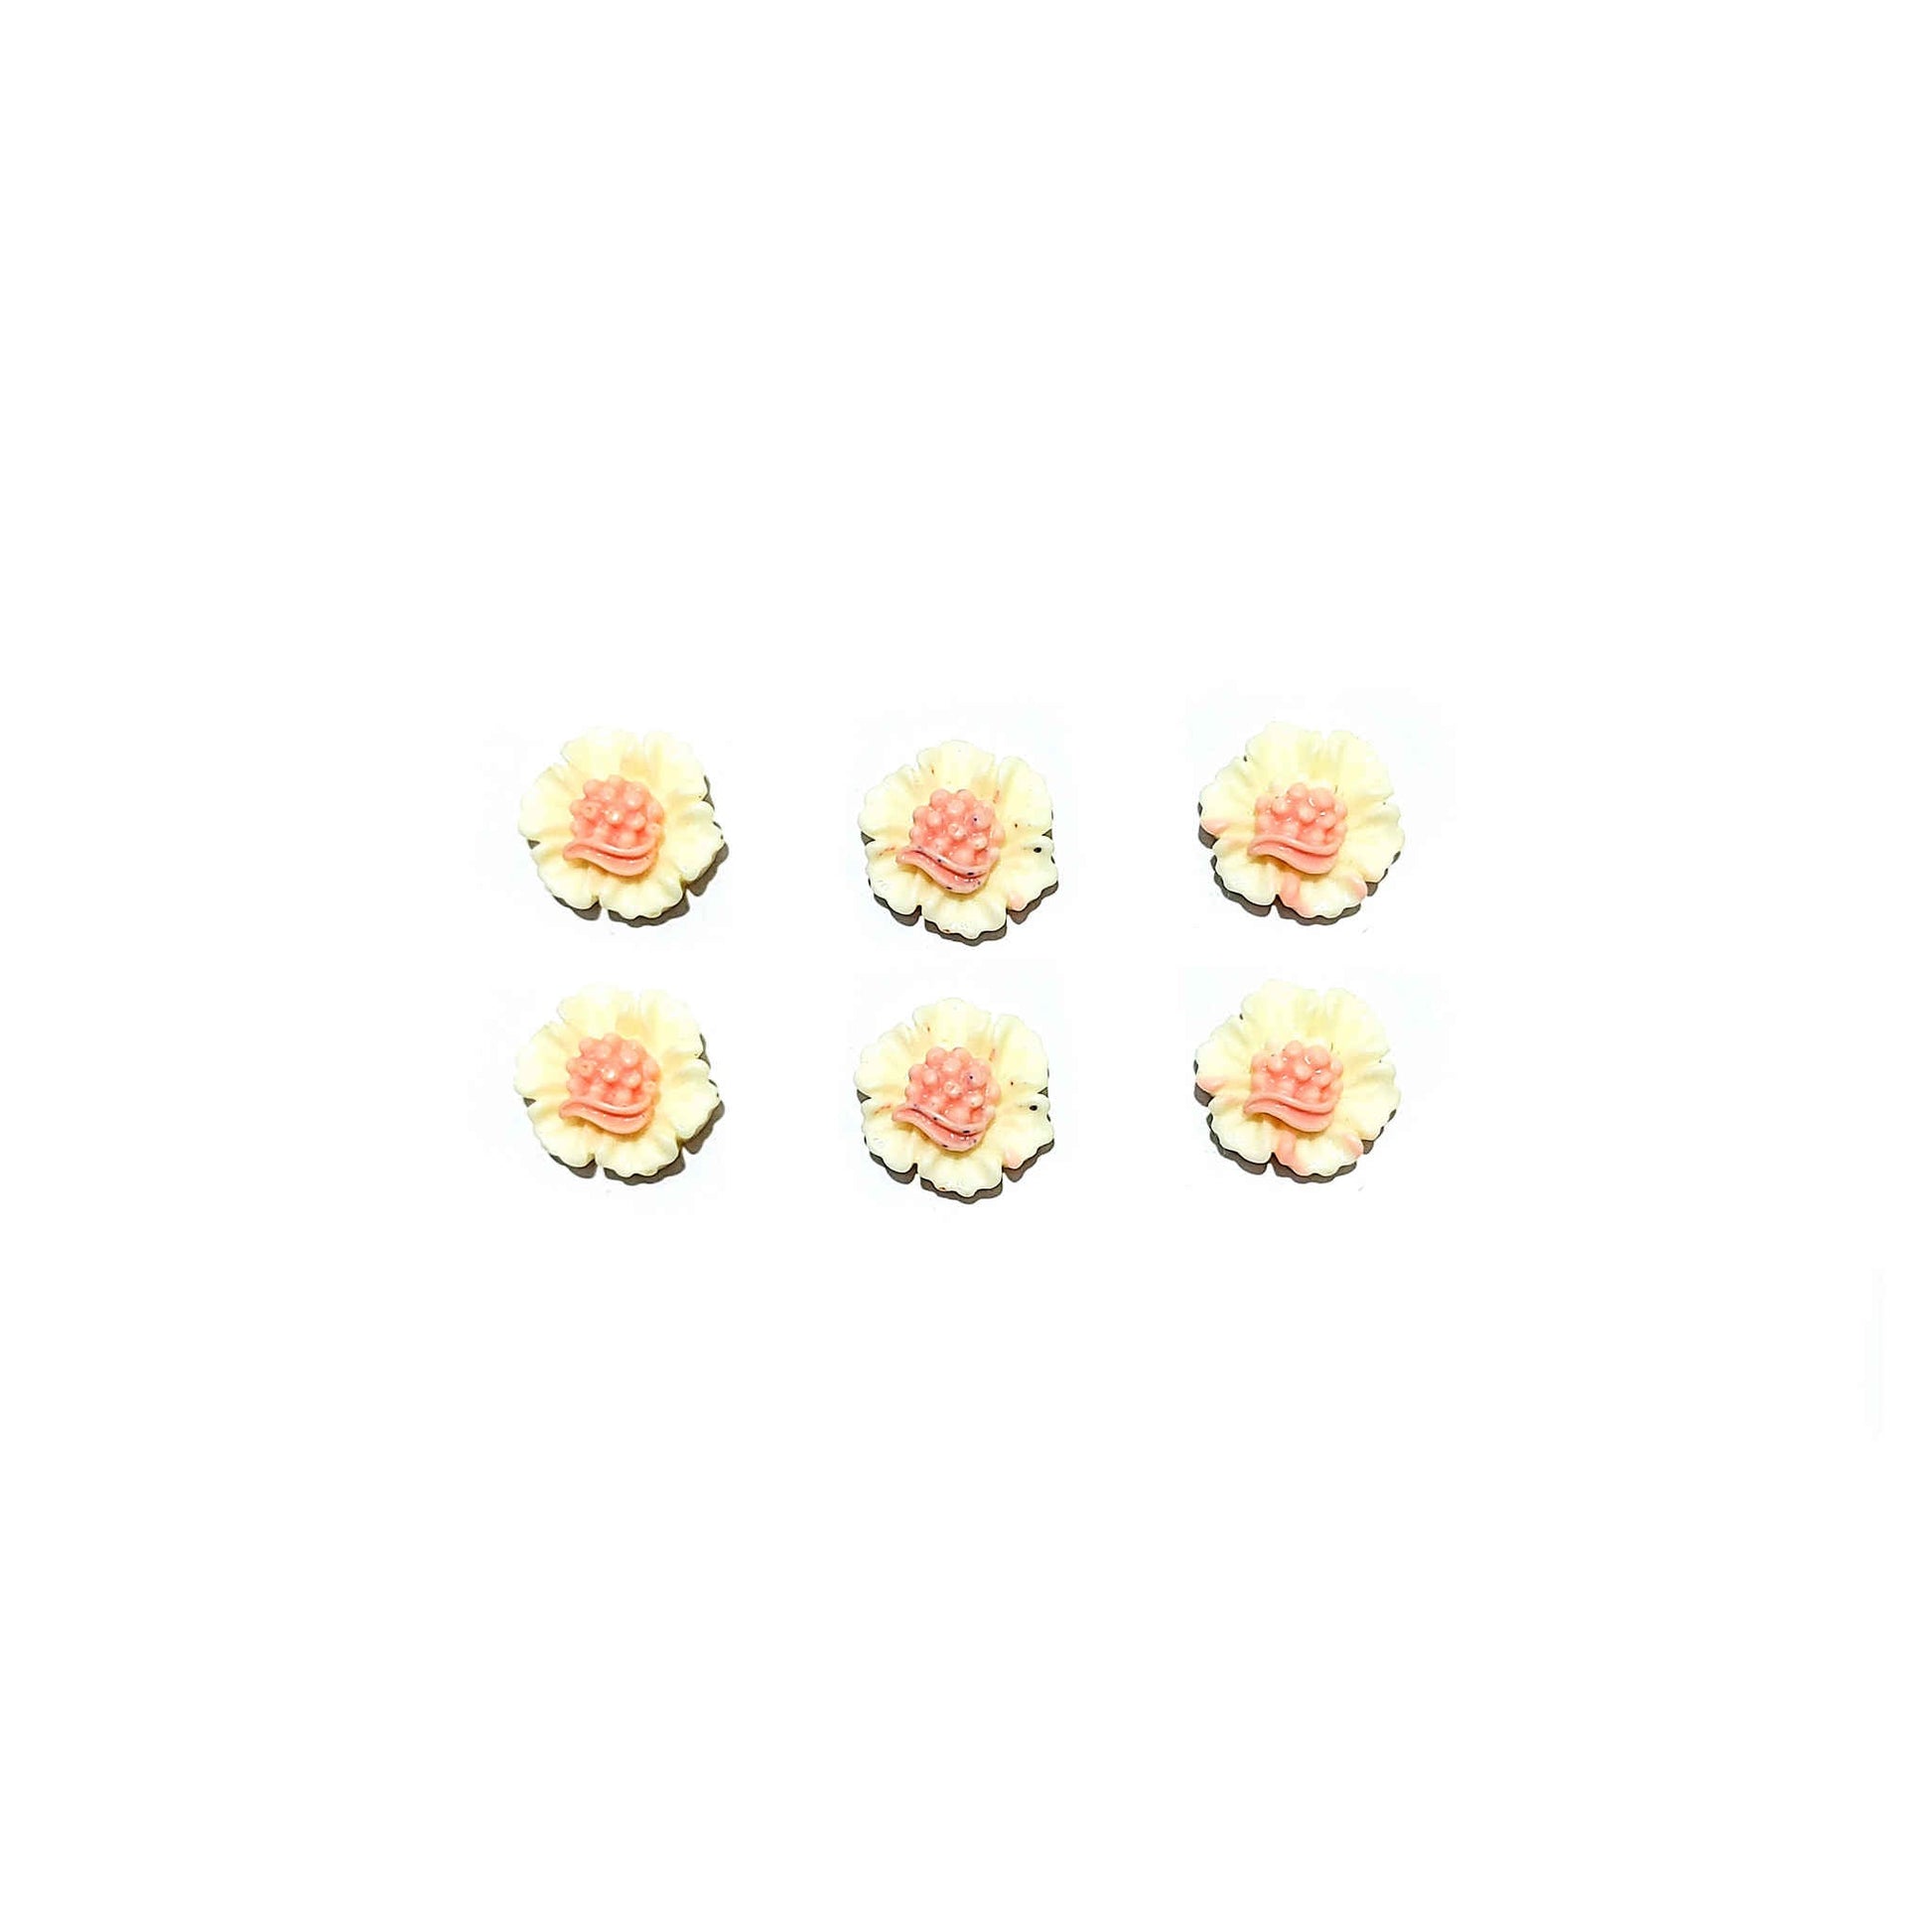 Indian Petals Flat Base Beautiful Floral 3D Cabochons for Craft Trousseau Packing or Decoration - Design 422, Style - Classic, Ivory